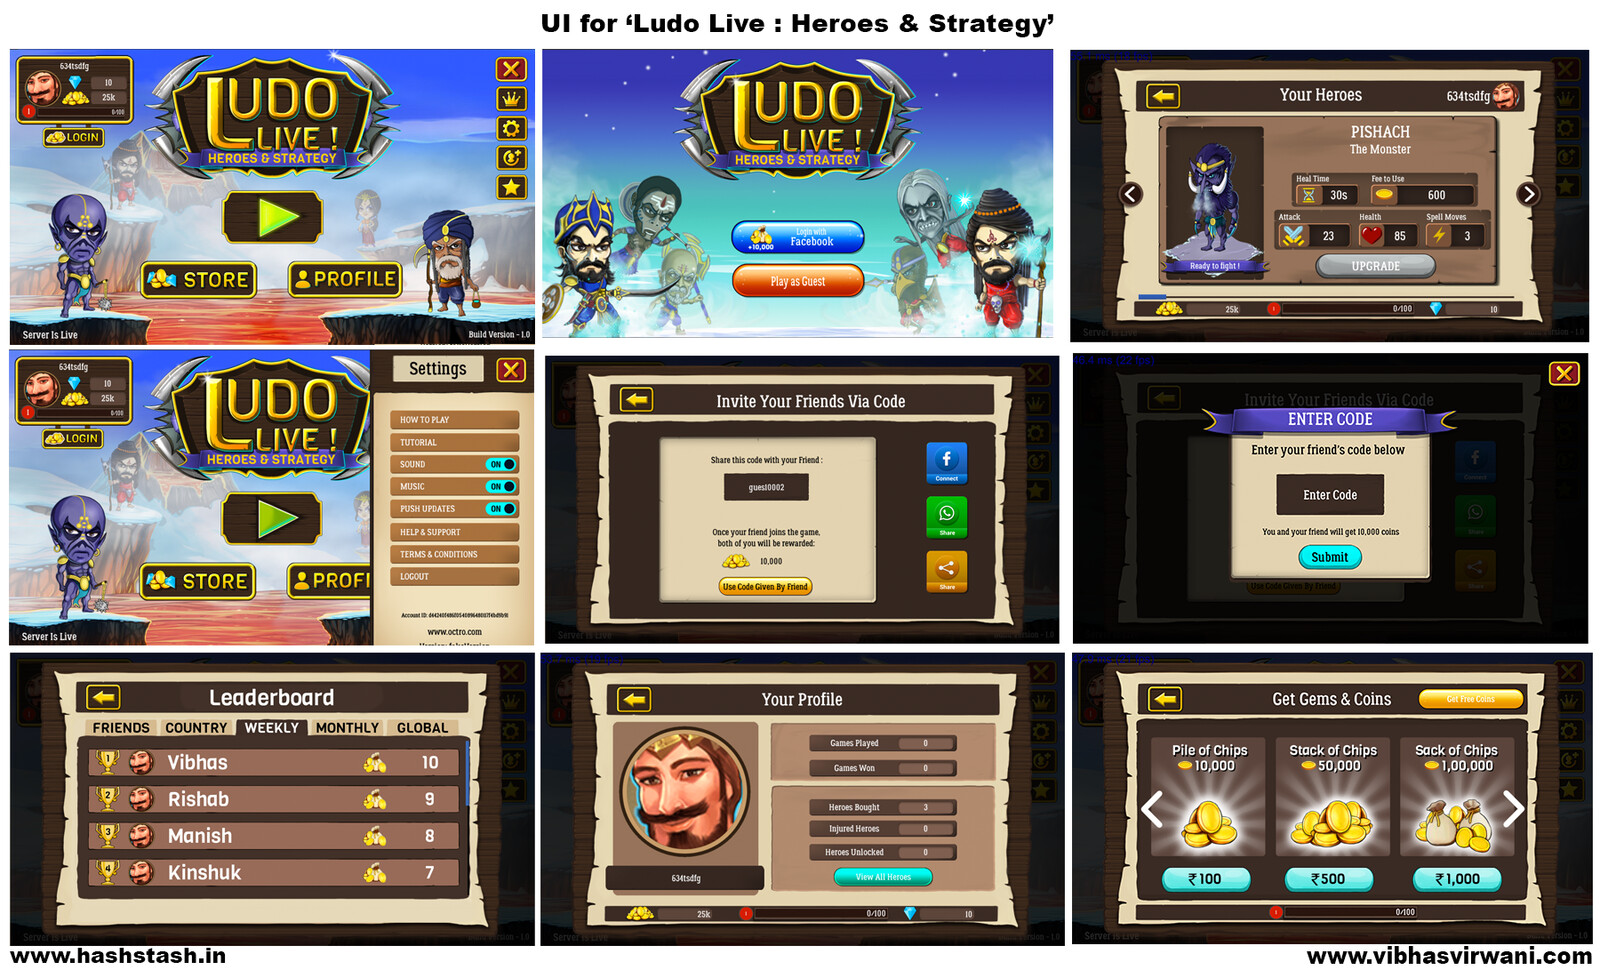 UI game screen designs for the android/ios game.